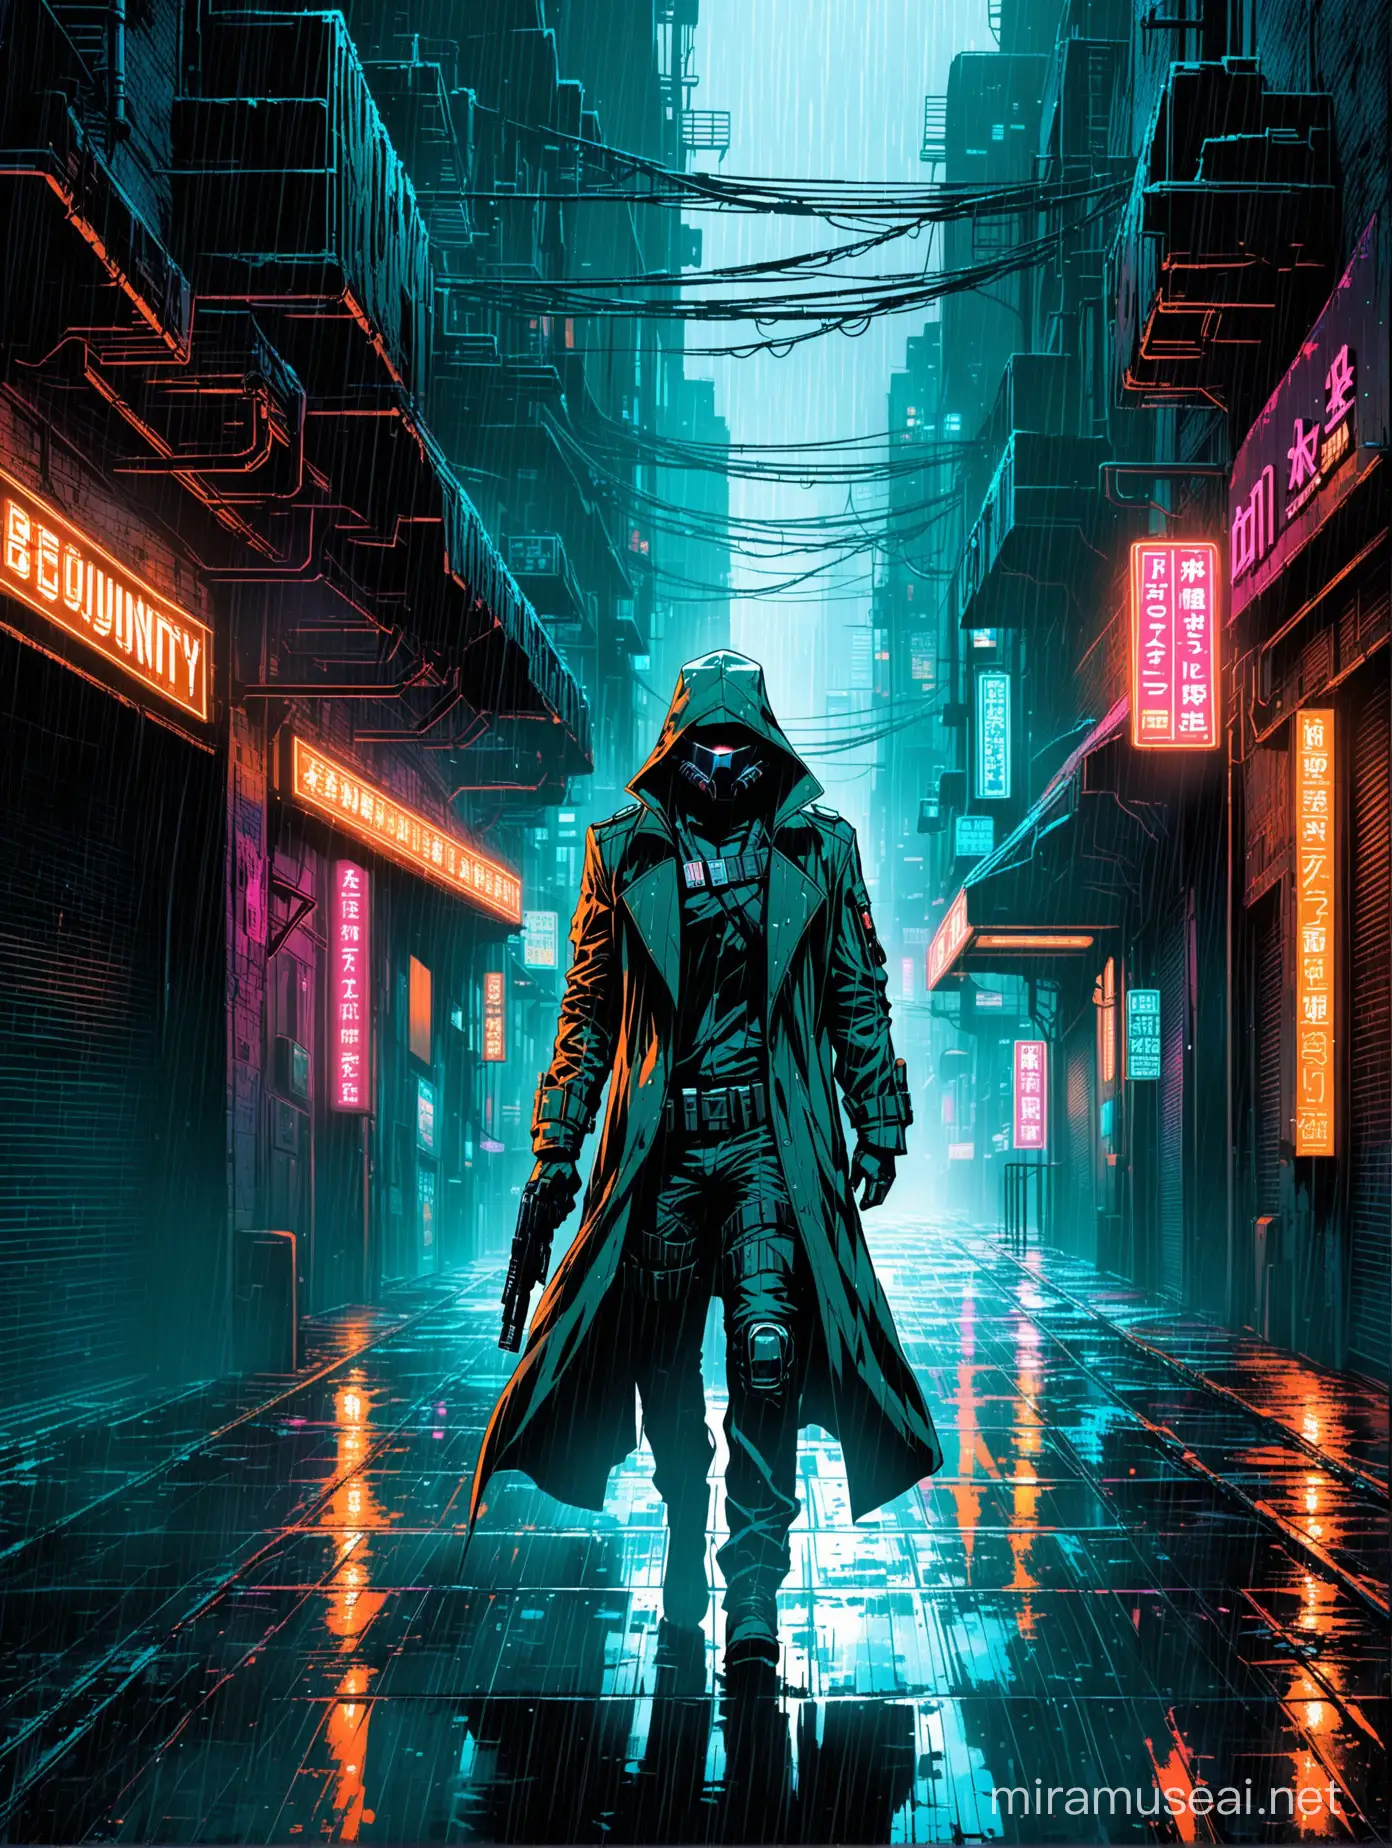 
Title: "Rainy Alley: A Dystopian Bounty Hunt"

Design Elements:

The poster features a gritty, noir-inspired scene reminiscent of "Blade Runner."
Set in a rain-soaked alleyway, the atmosphere is dark and moody, with the flickering glow of neon signs reflecting off the wet pavement.
In the center of the scene stands a dystopian bounty hunter, clad in a trench coat and equipped with futuristic weaponry, reminiscent of characters from the cyberpunk genre.
The bounty hunter is illuminated by the neon lights, casting dramatic shadows against the alley walls.
Behind the bounty hunter, the alley stretches into the distance, disappearing into the darkness of the cityscape.
The rain is depicted using streaks of white lines, adding movement and depth to the scene.
The color palette is dominated by deep blues, grays, and oranges, creating a sense of urban decay and desolation.